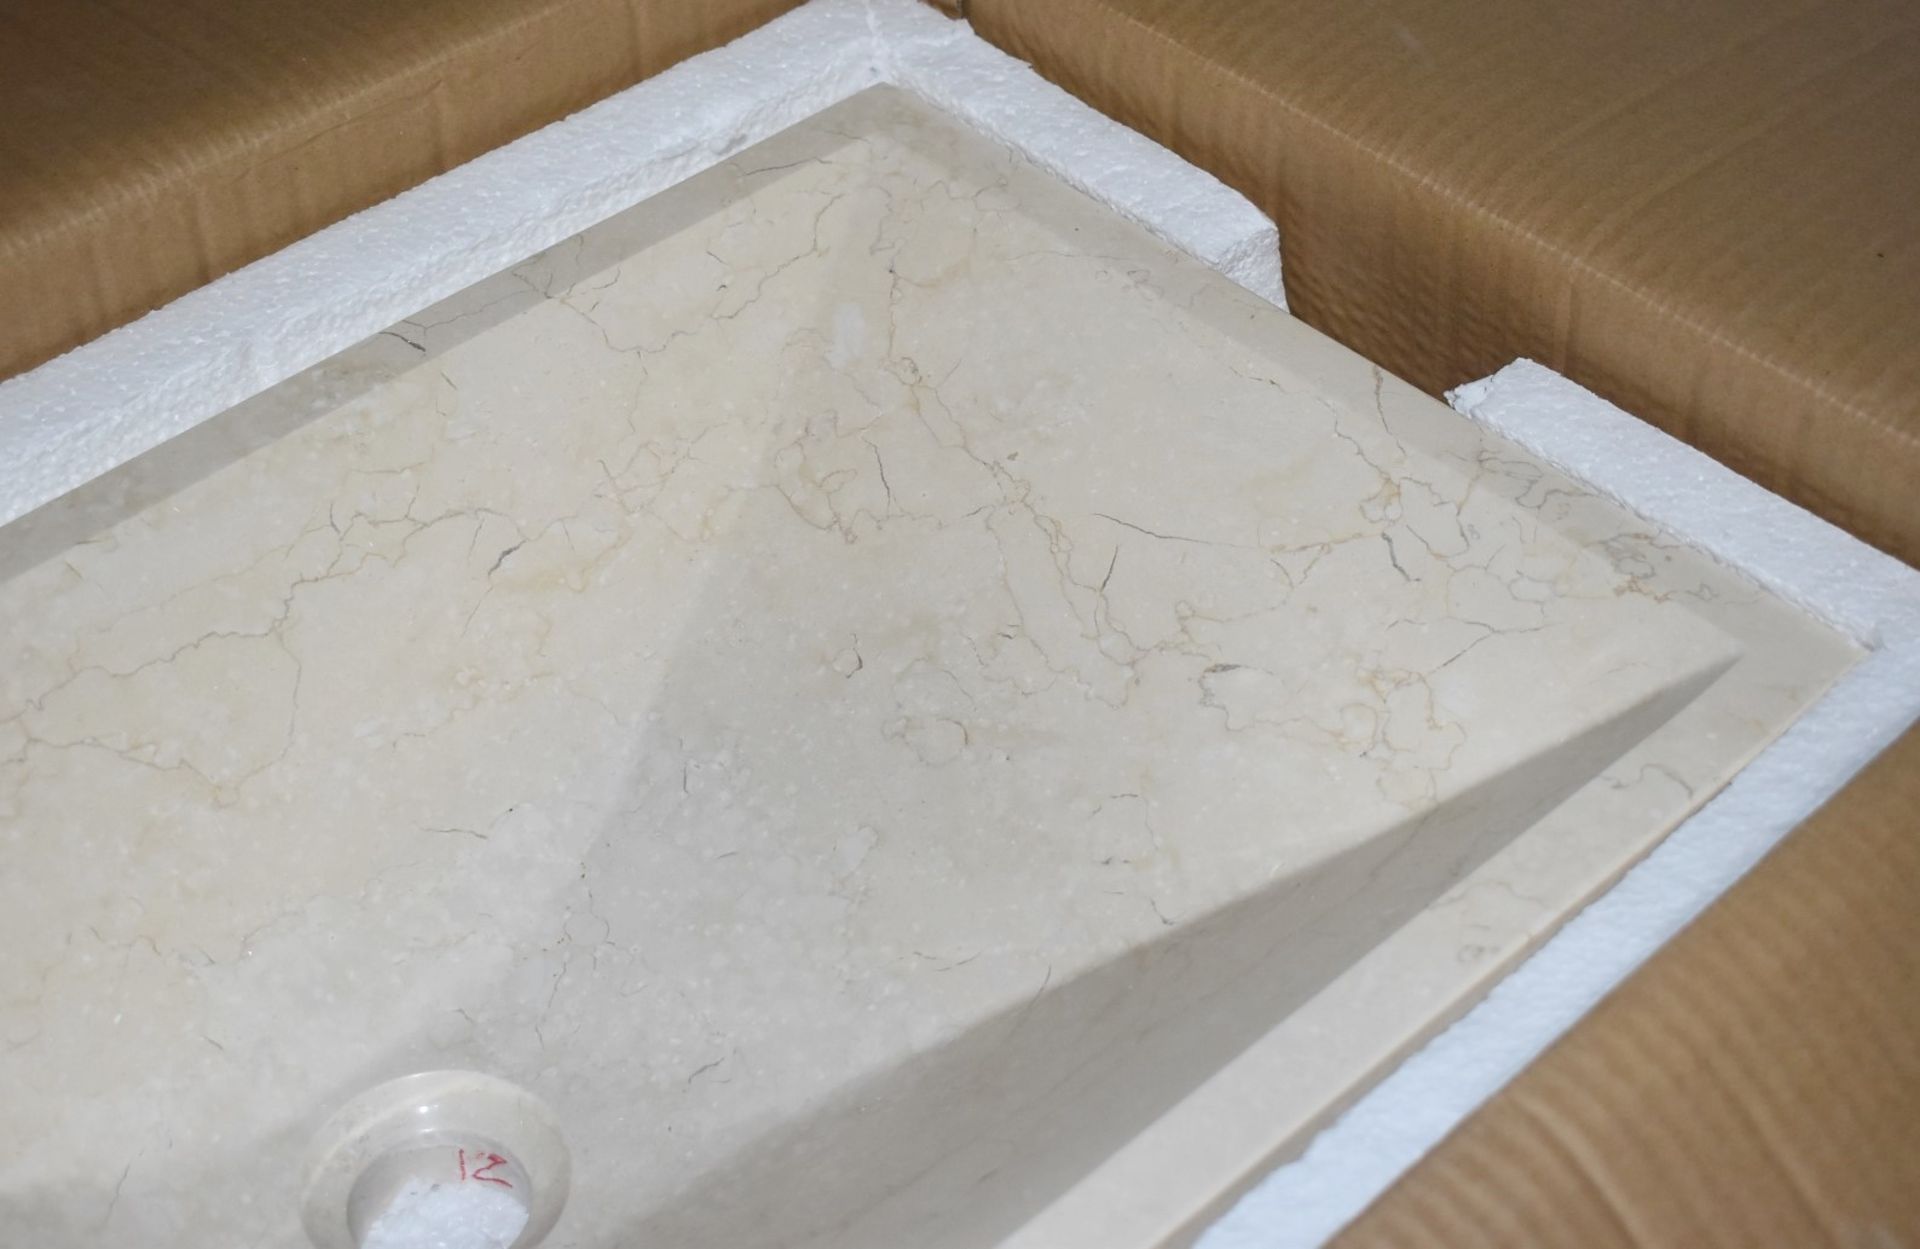 1 x Stonearth 'Karo' Solid Galala Marble Stone Countertop Sink Basin - New Boxed Stock - RRP £ - Image 3 of 8